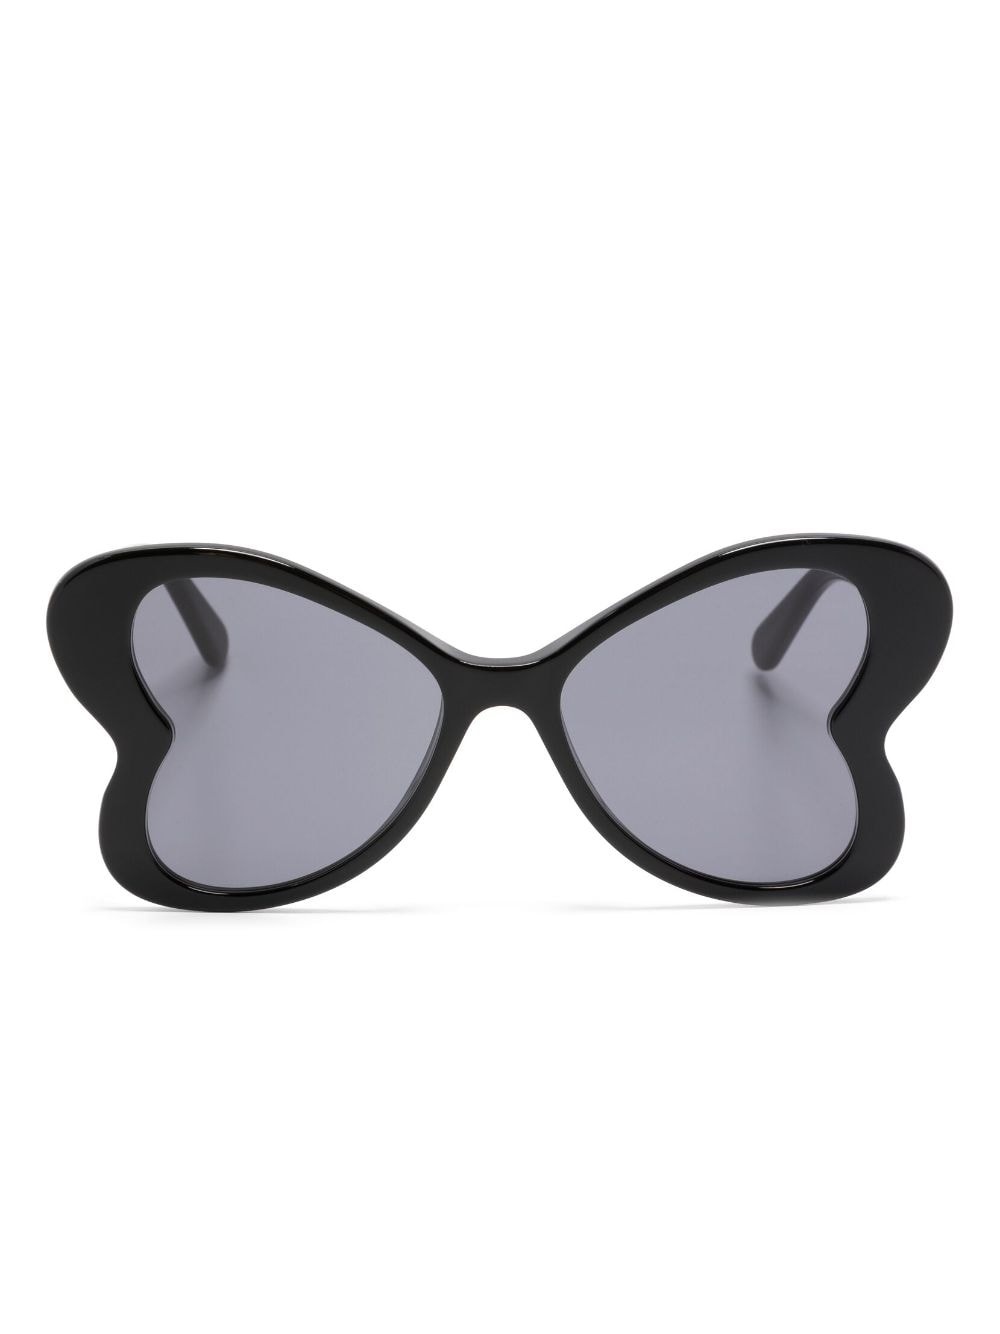 butterfly-frame sunglasses - 1